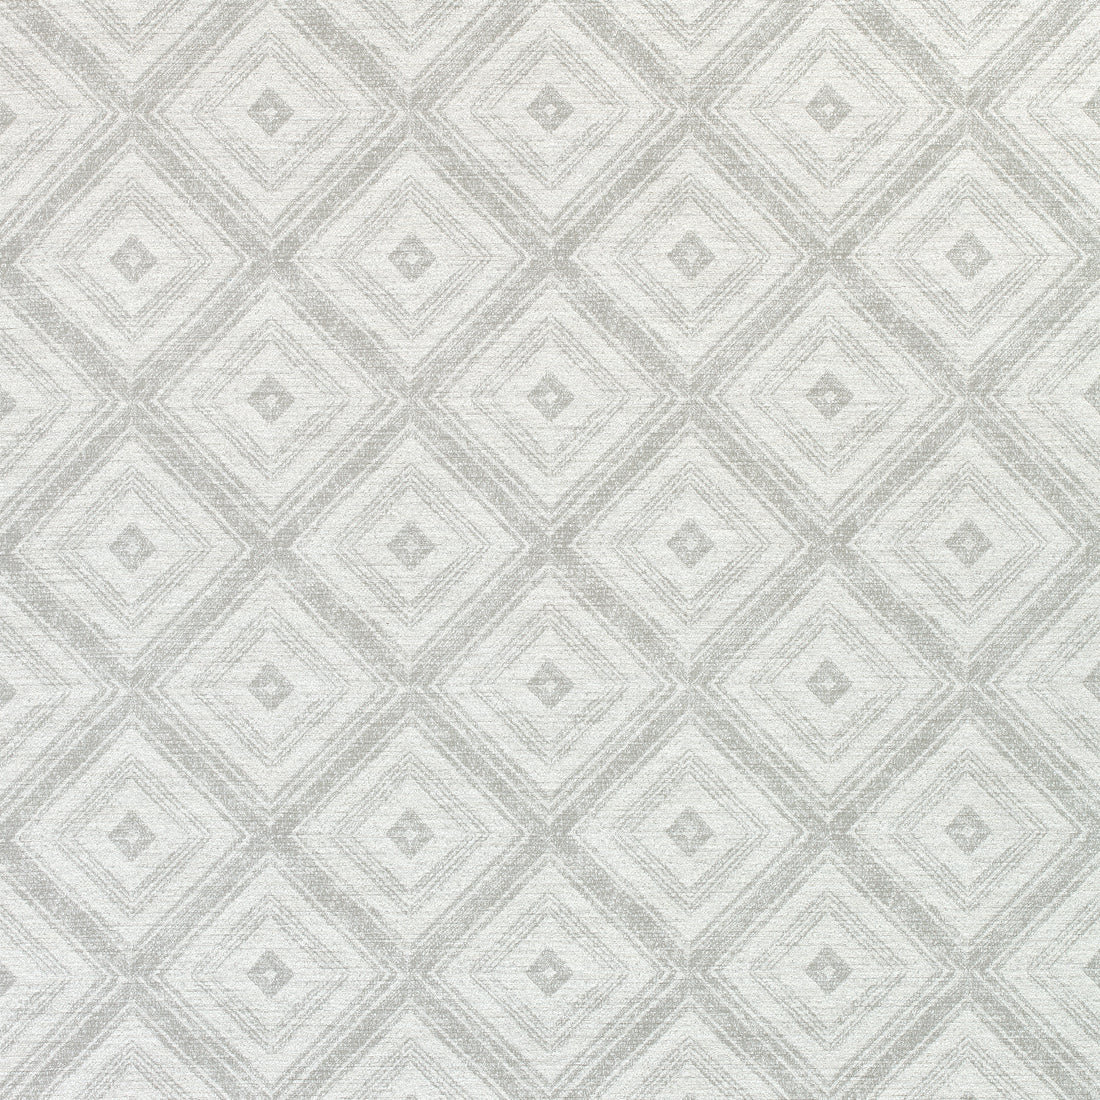 Ellison fabric in stone color - pattern number W789127 - by Thibaut in the Reverie collection